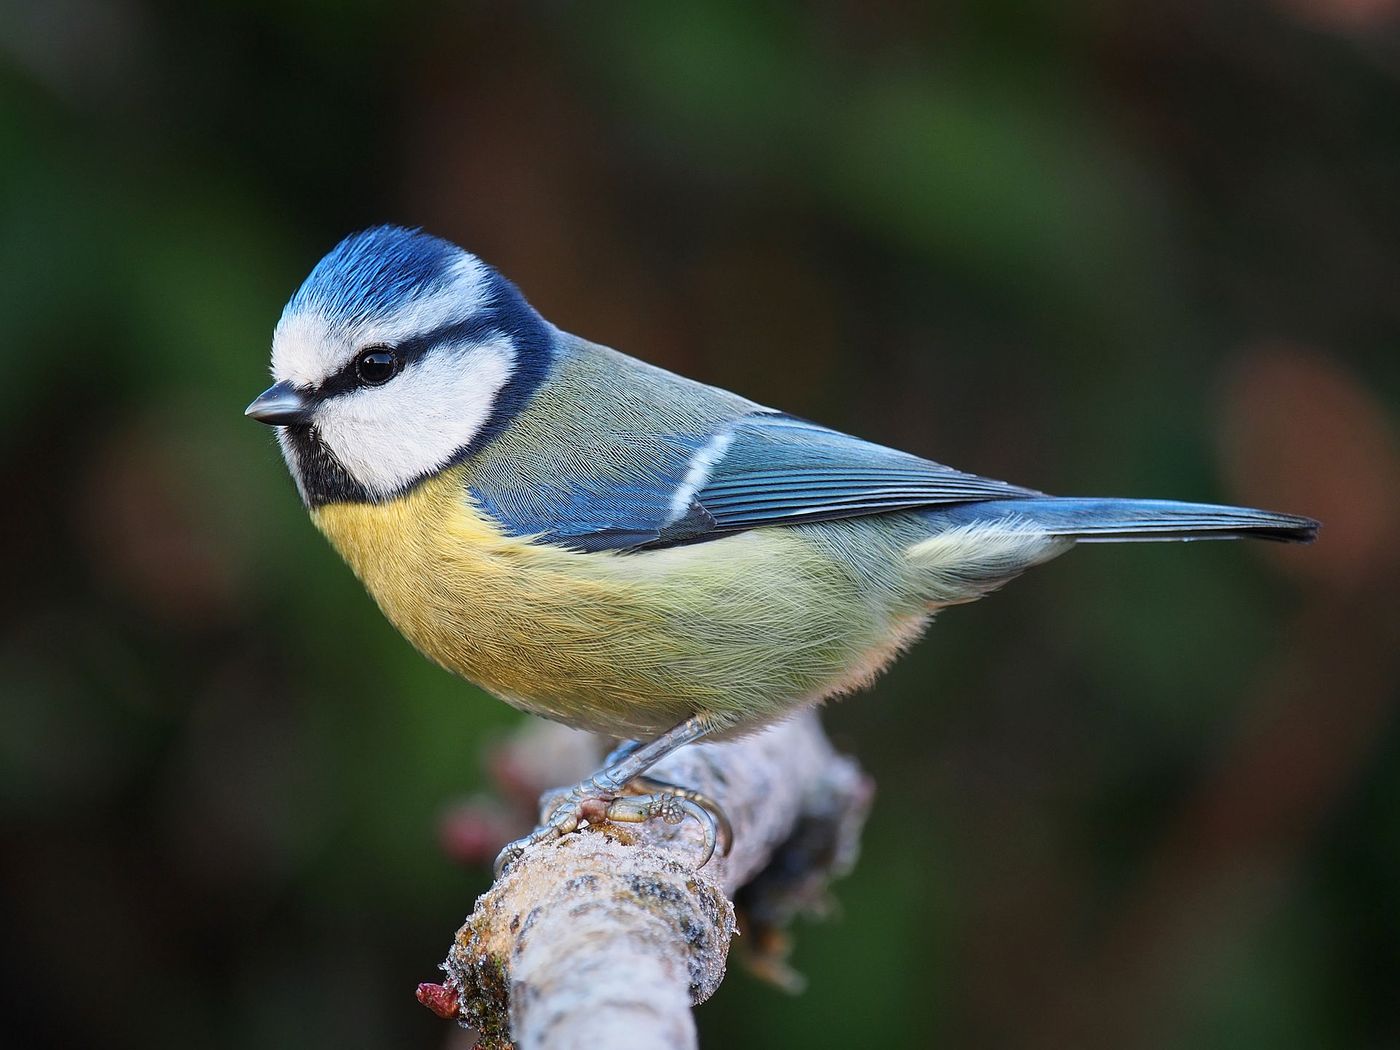 The blue tit is one of the species of birds used in the research to learn more about birds' eyesight.